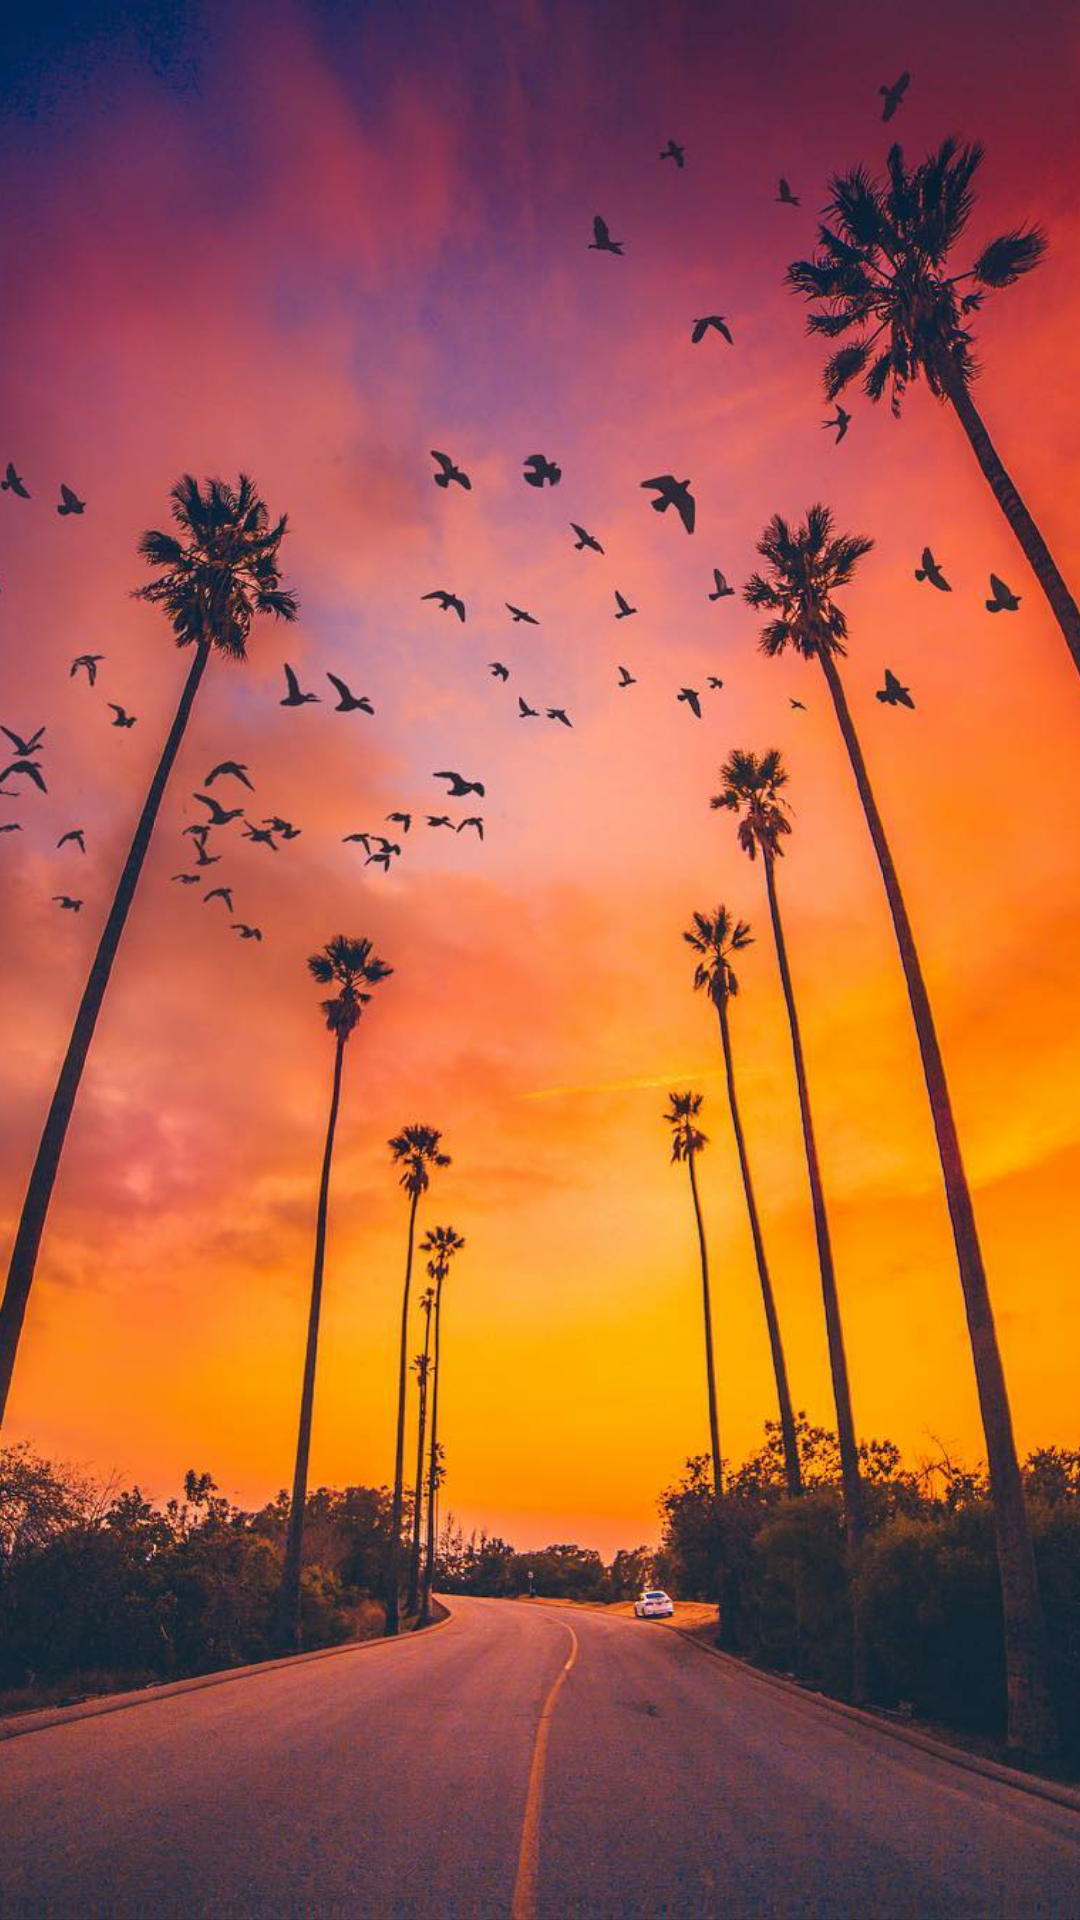 Palm Trees Sunset Nature IPhone Wallpaper   IPhone Wallpapers 1080x1920